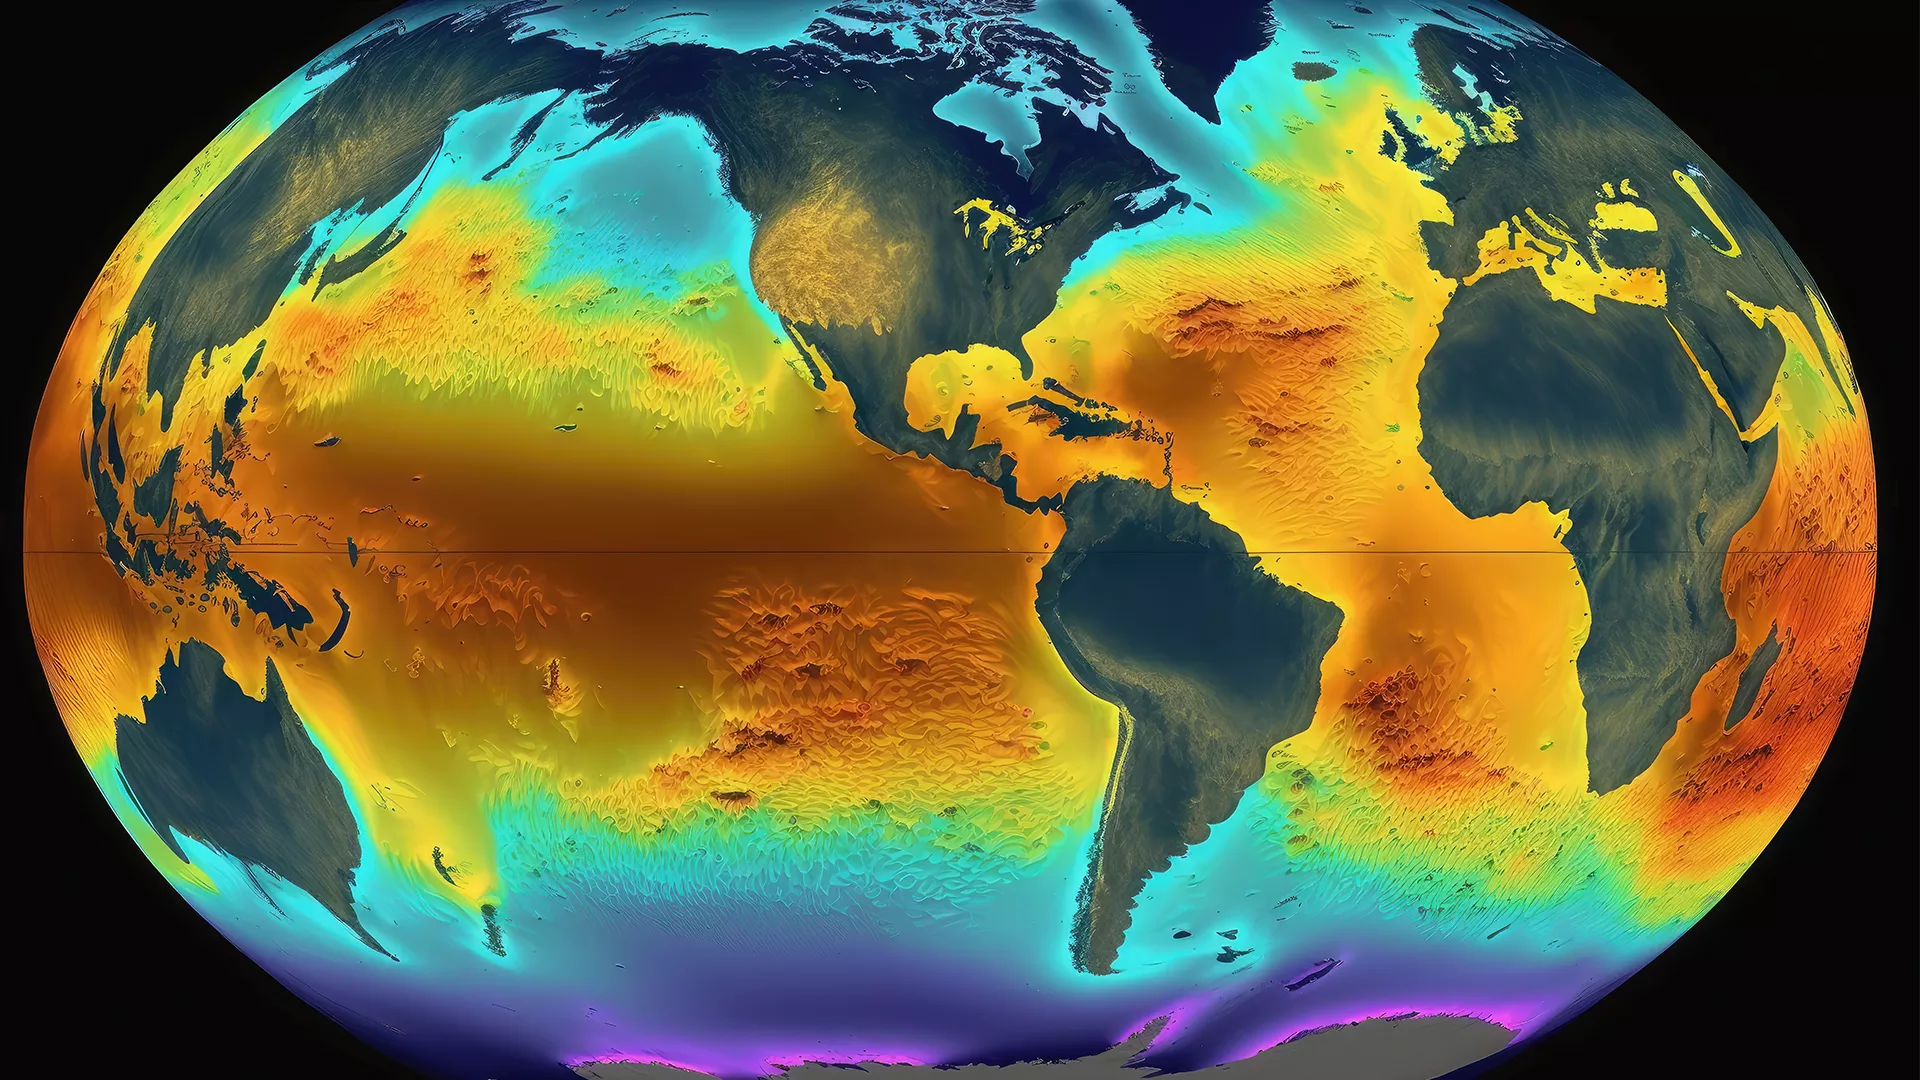 Image of the entire earth with sea surface temperature colors along the ocean.